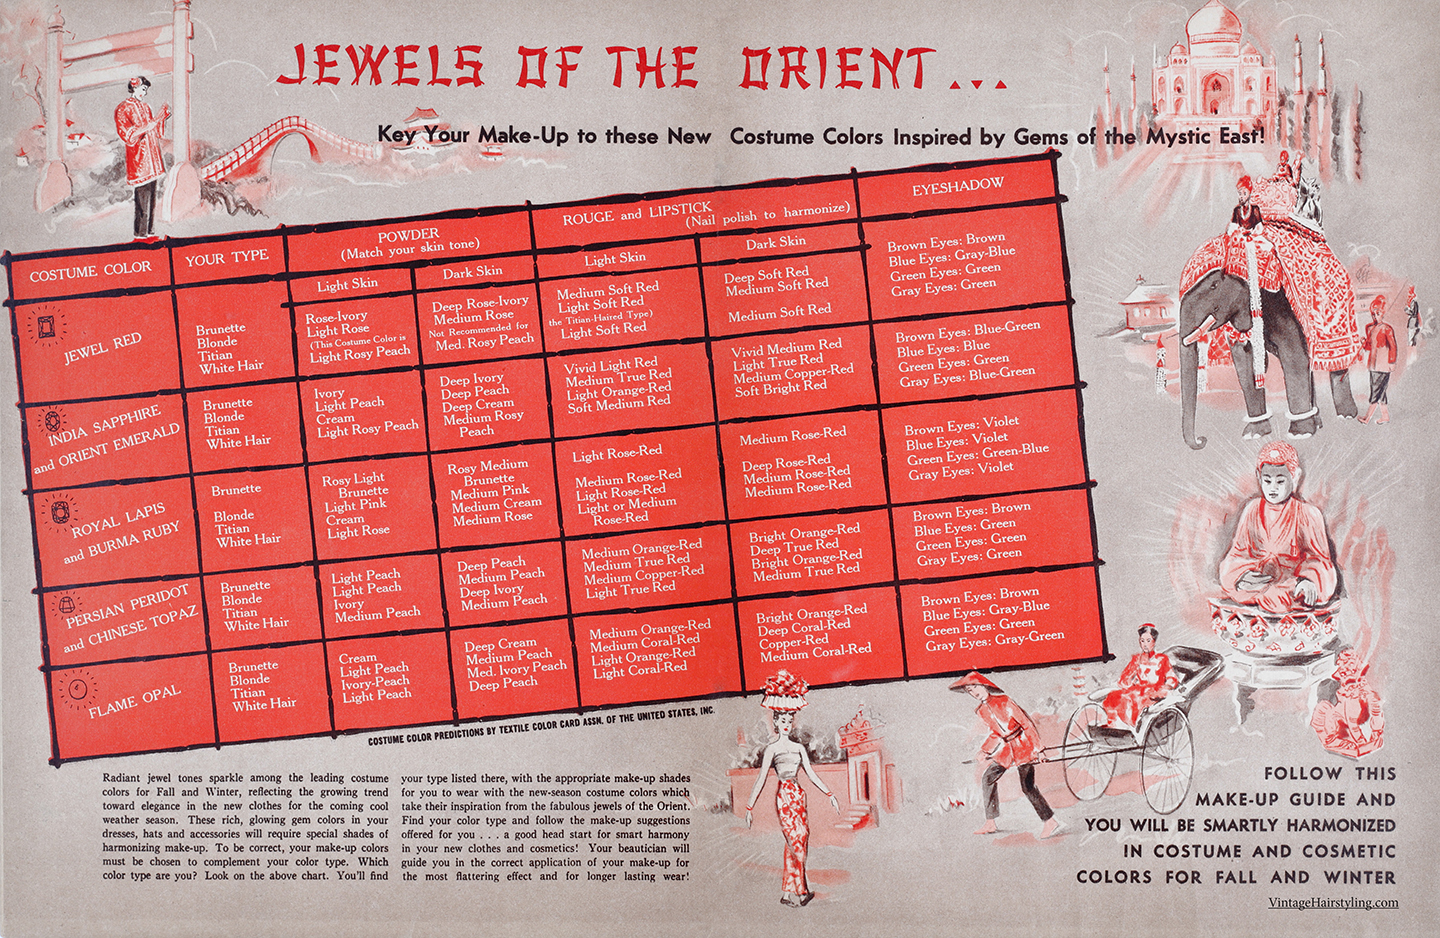 1940 makeup color chart Fall jewels of the orient theme